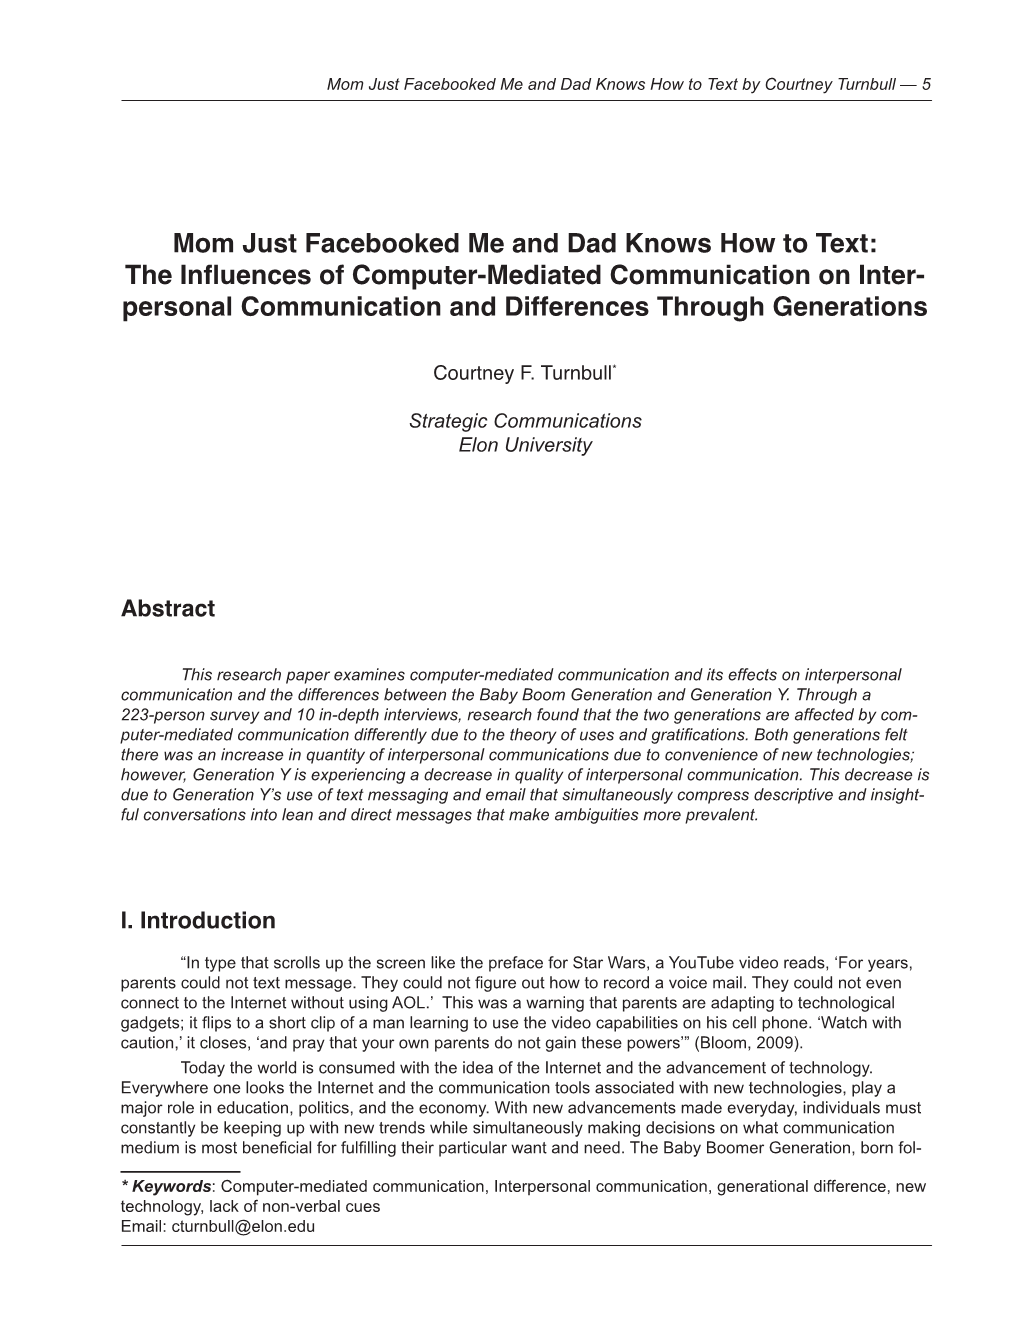 The Influences of Computer-Mediated Communication on Inter- Personal Communication and Differences Through Generations